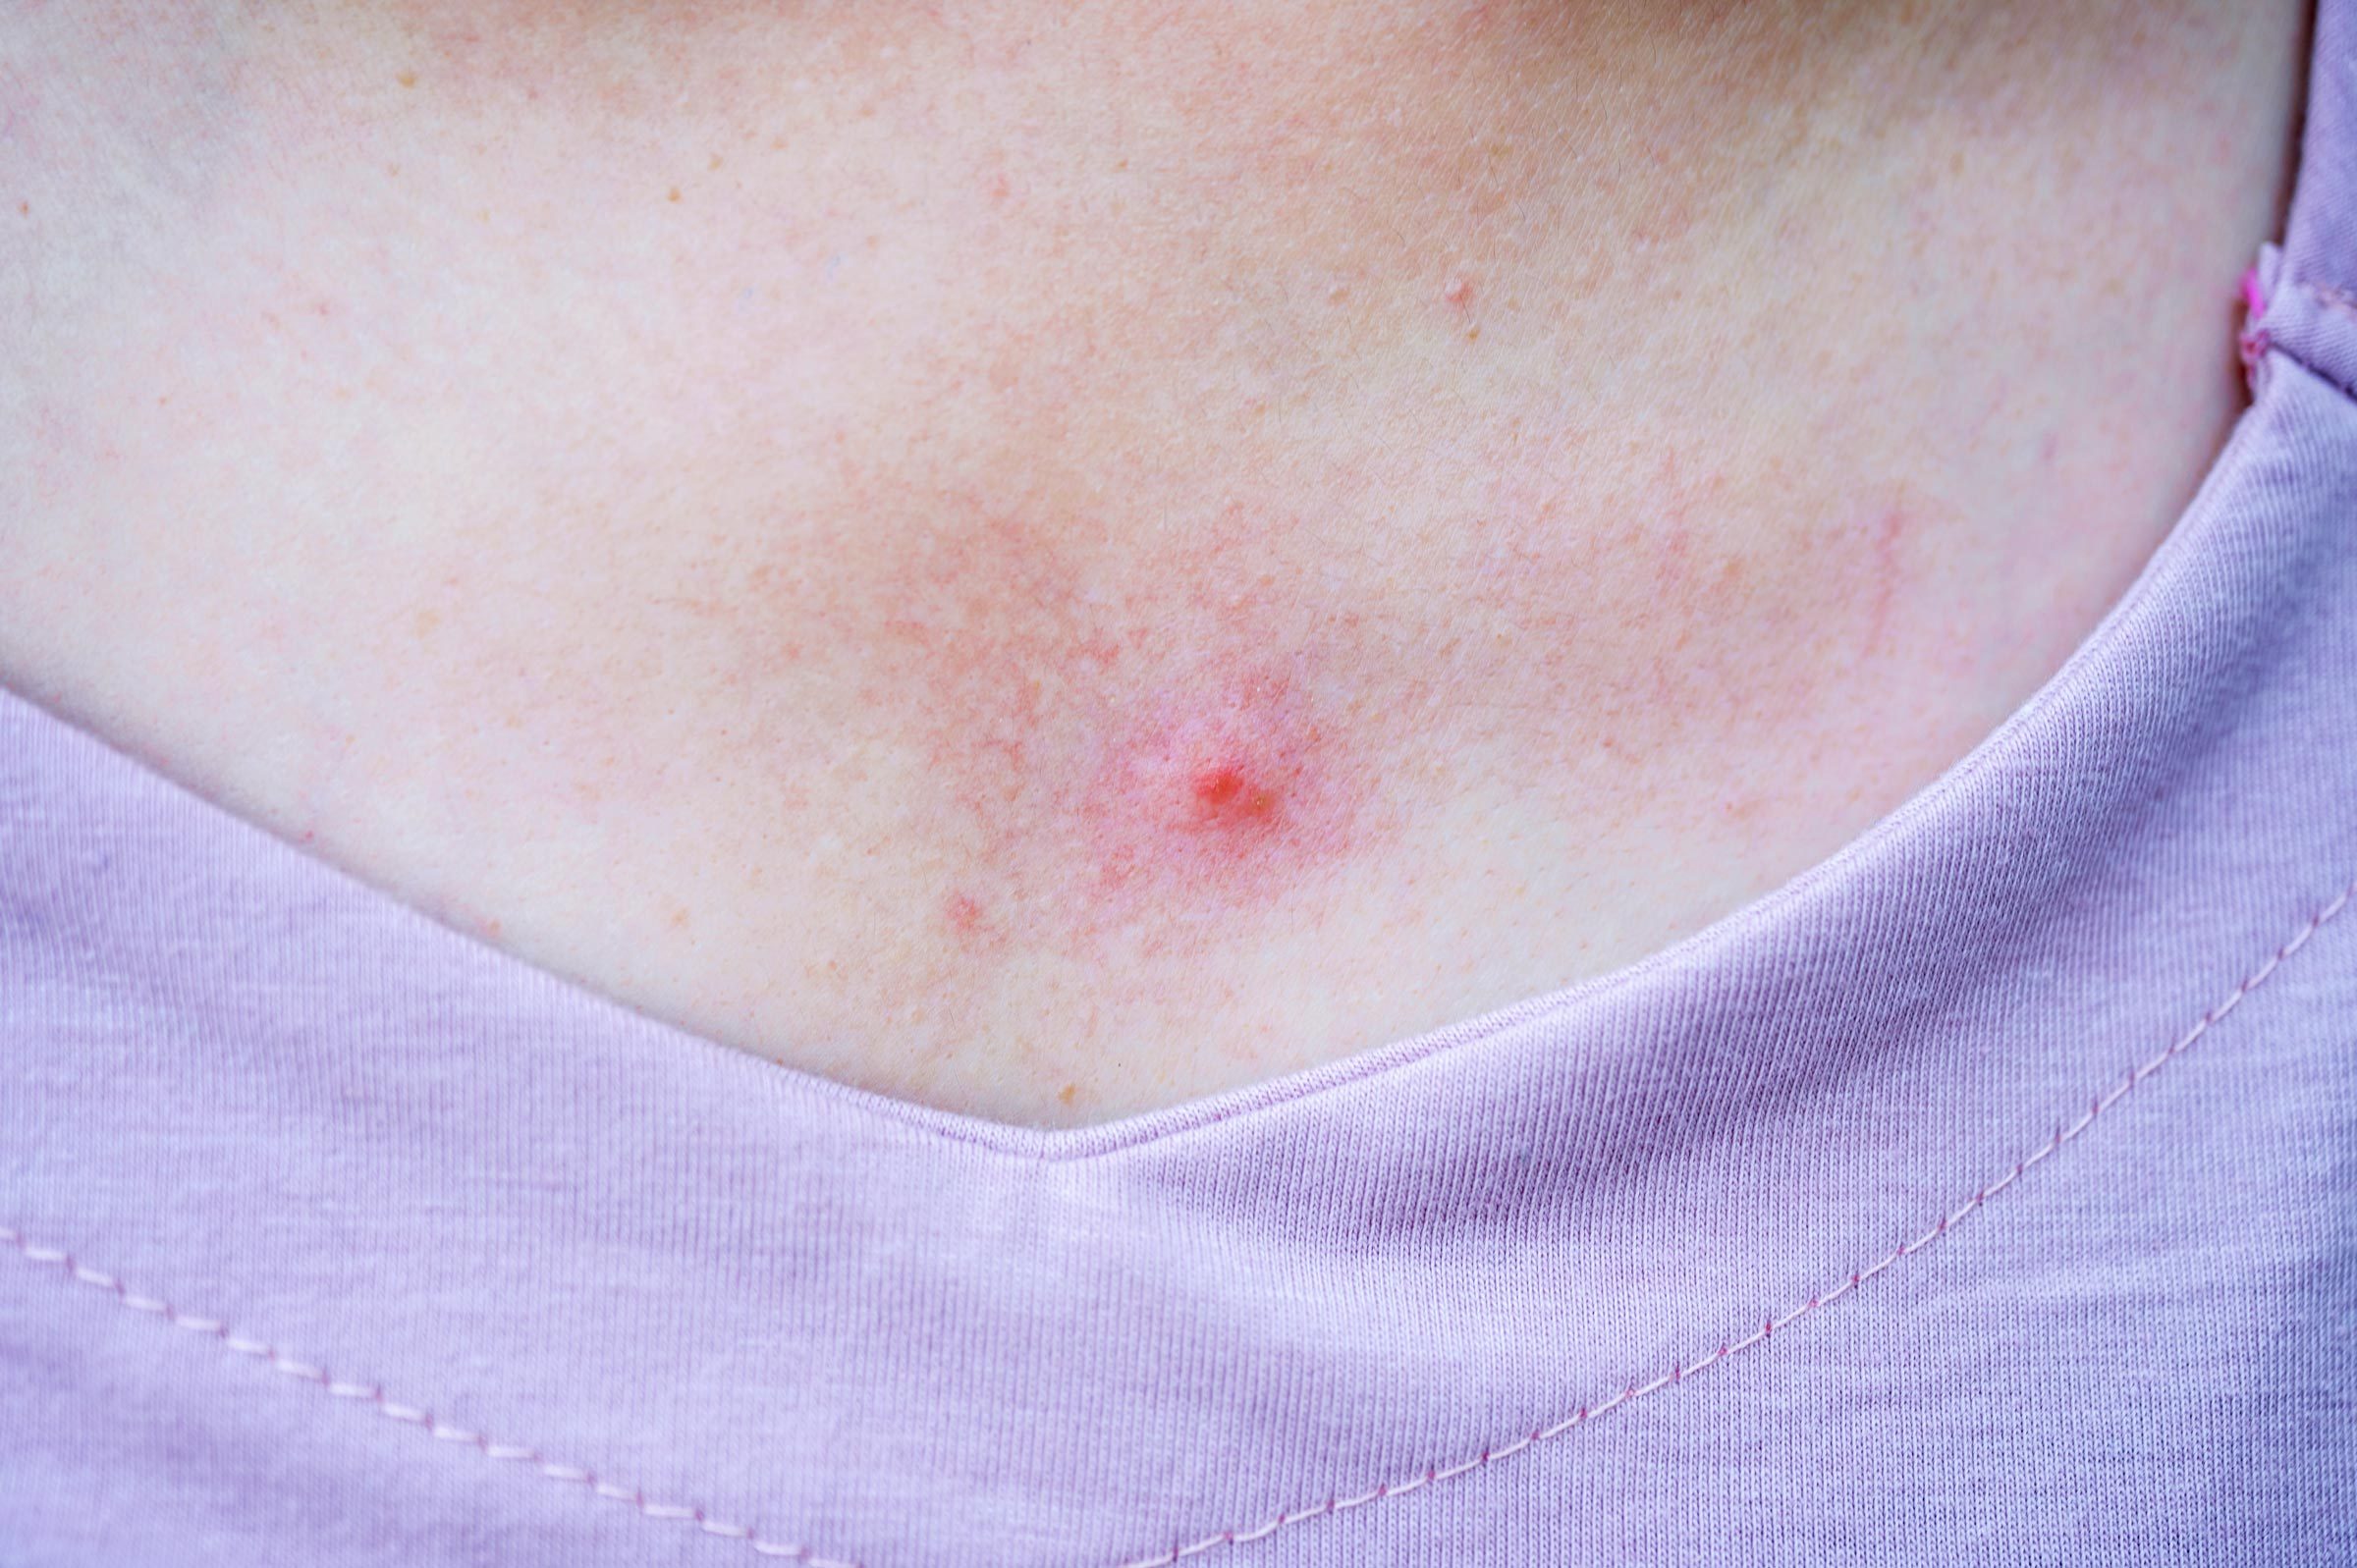 Sweat Pimples: How To Treat and Prevent Them, from a Board-Certified Dermatologist